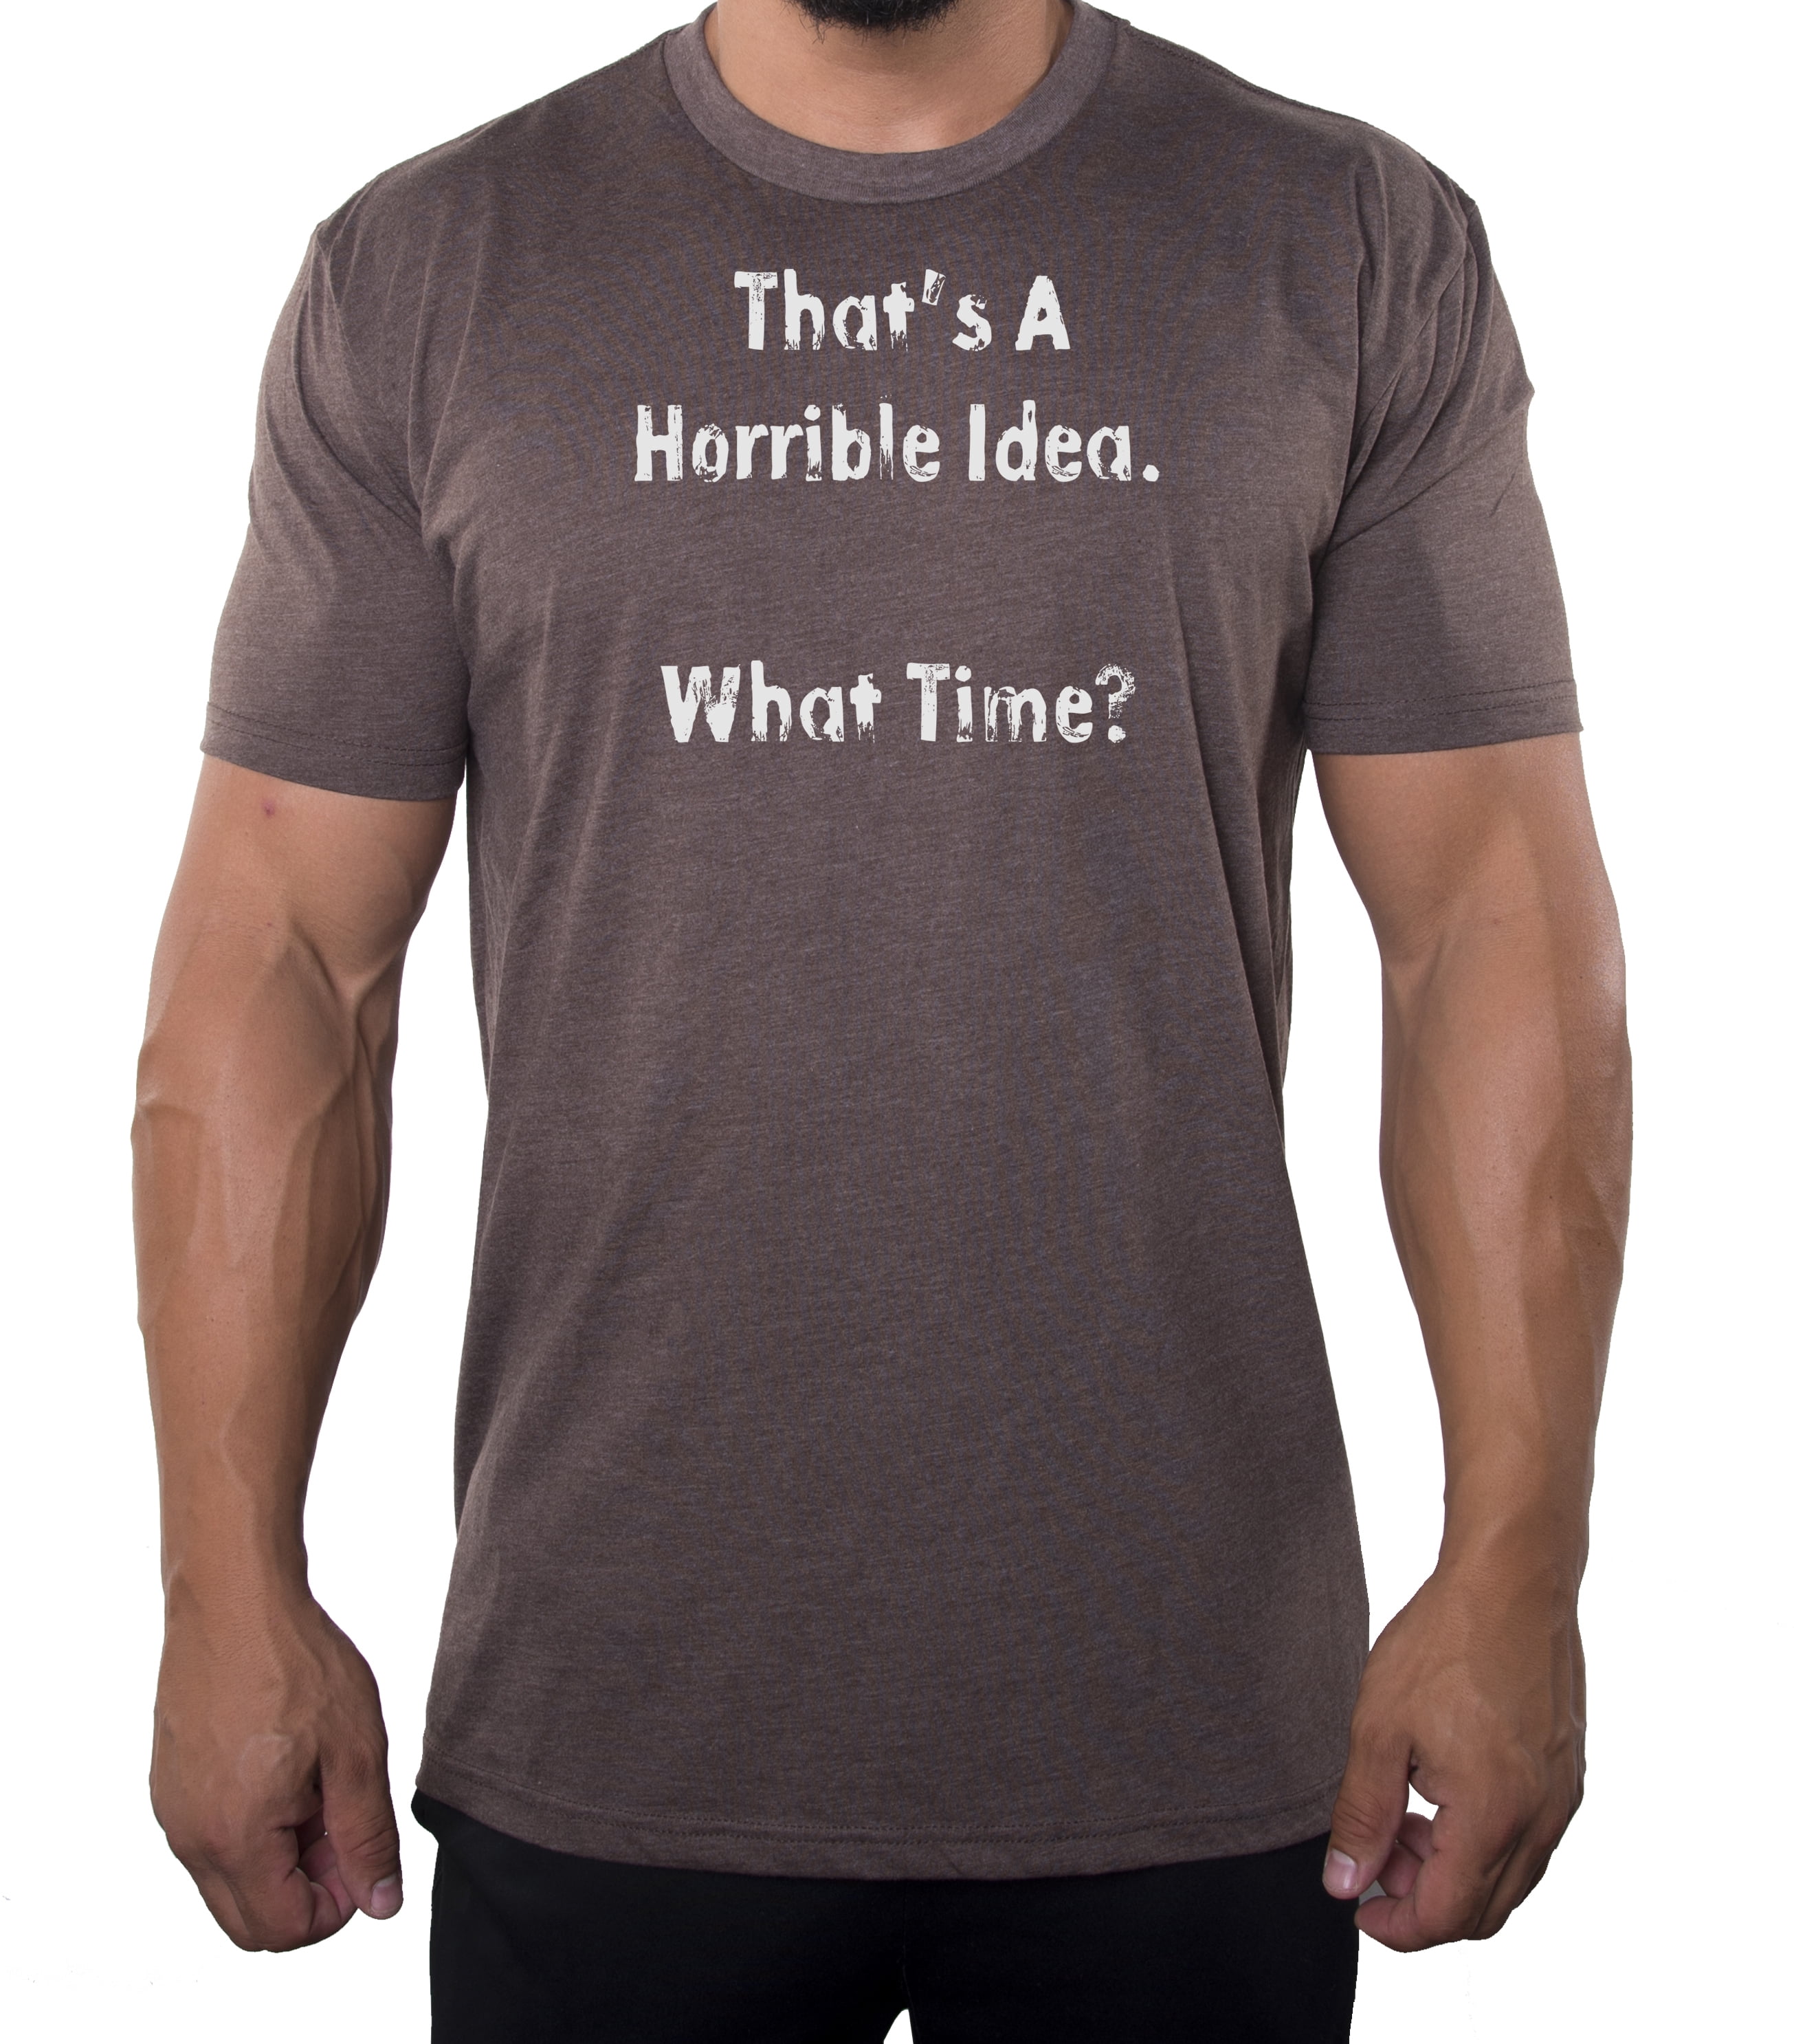 That's a horrible Idea Tee, Funny Graphic Tees, Sarcastic T-shirts for ...